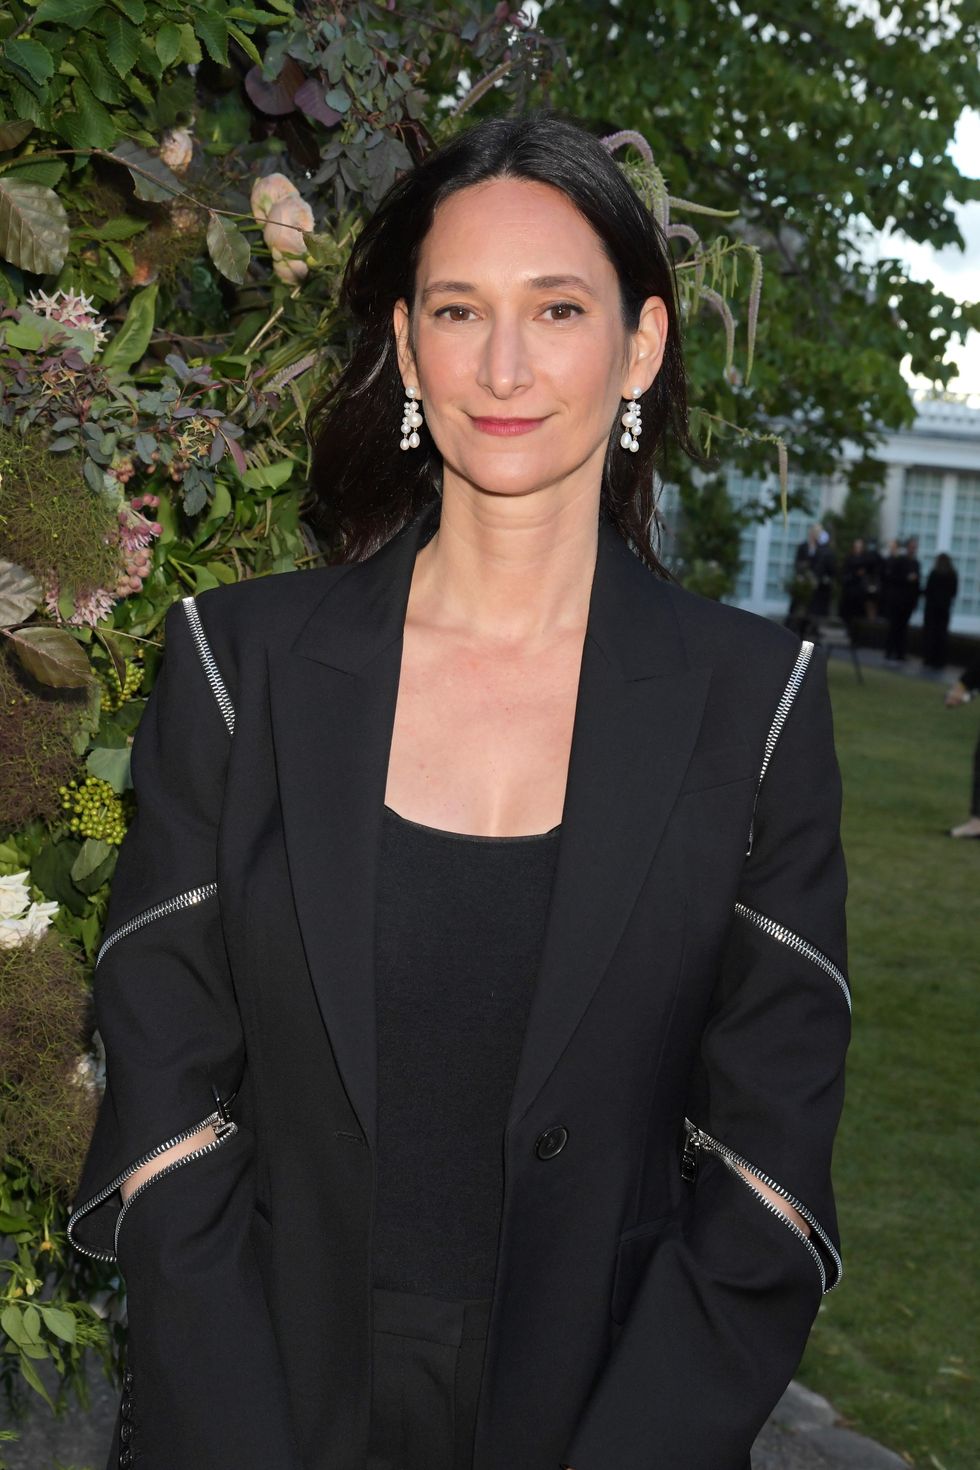 london, england june 30 bettina korek attends a private gathering with serpentine's chairman, michael r bloomberg, to honour artists and thank most loyal supporters at the serpentine gallery on june 30, 2022 in london, england pic credit dave benett